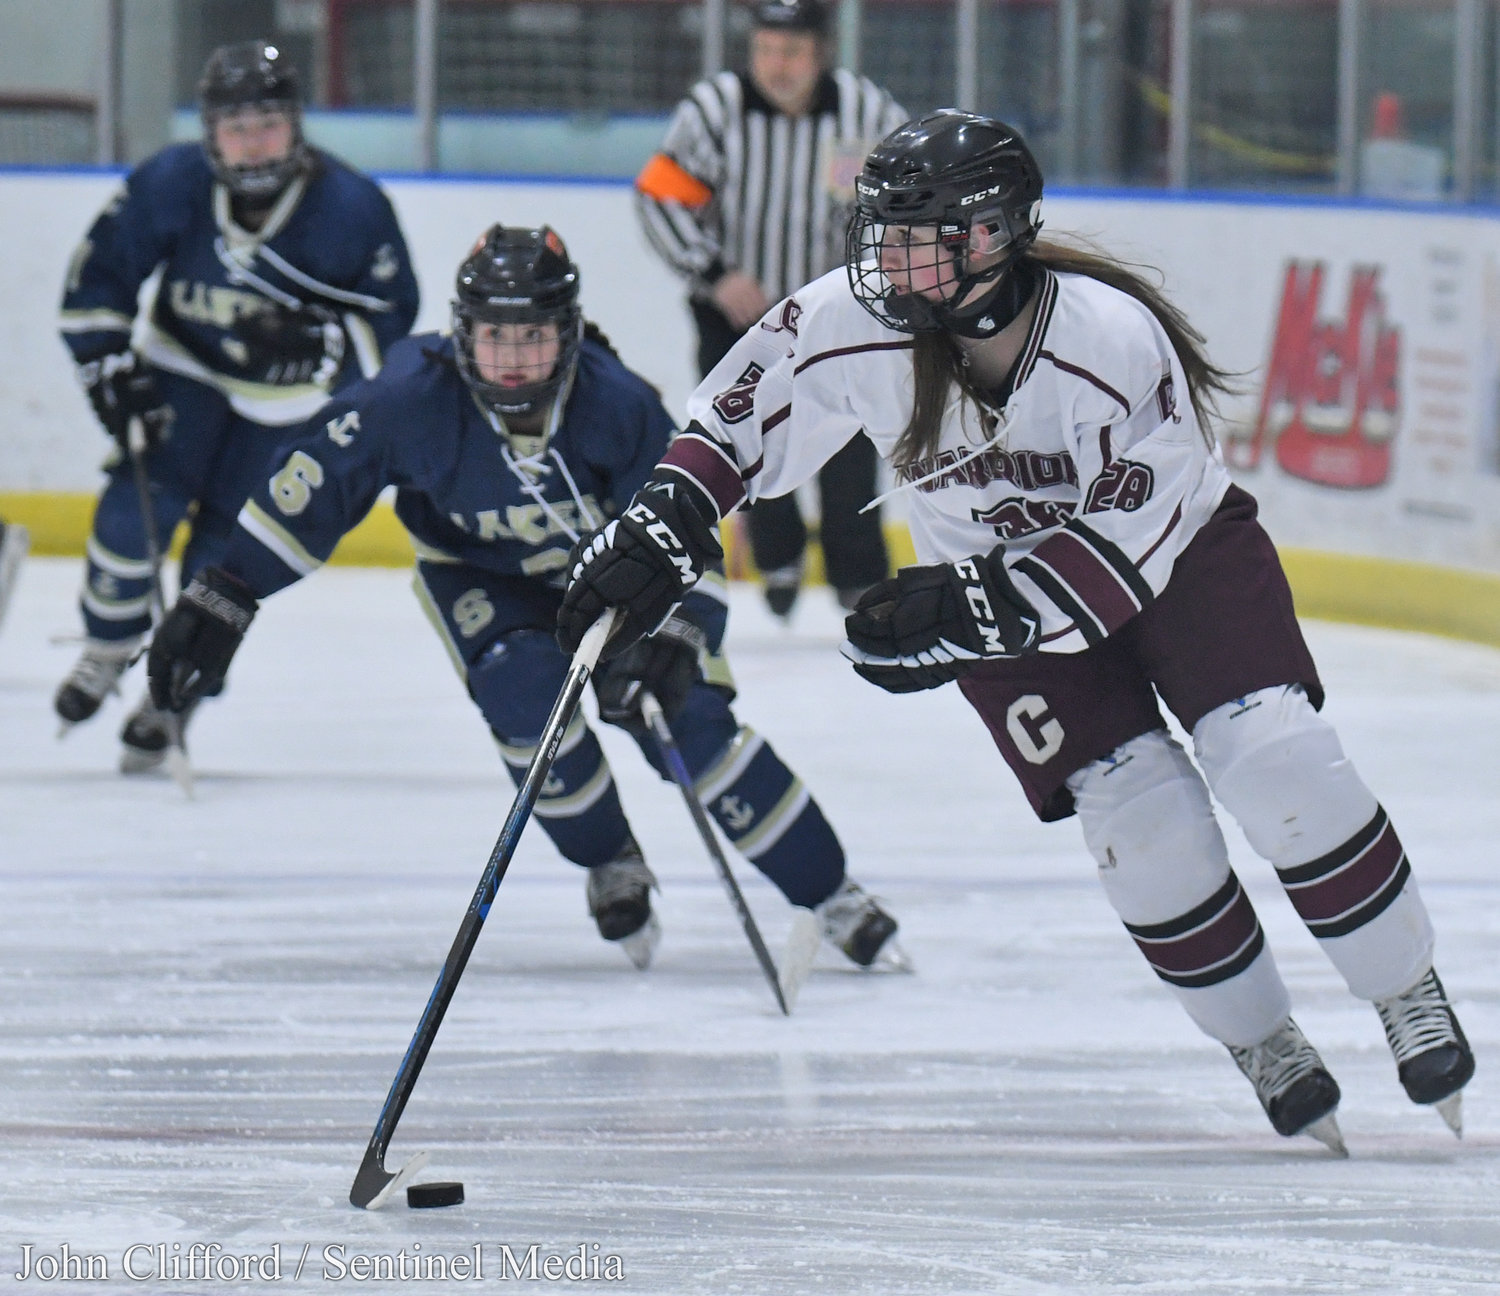 The Clinton Warriors in action against the Skaneateles Lakers in the Section III girls ice hockey championship Wednesday night in Nedrow. Clinton beat Skaneateles 1-0 in overtime. Clinton #28 brings the puck up ice.